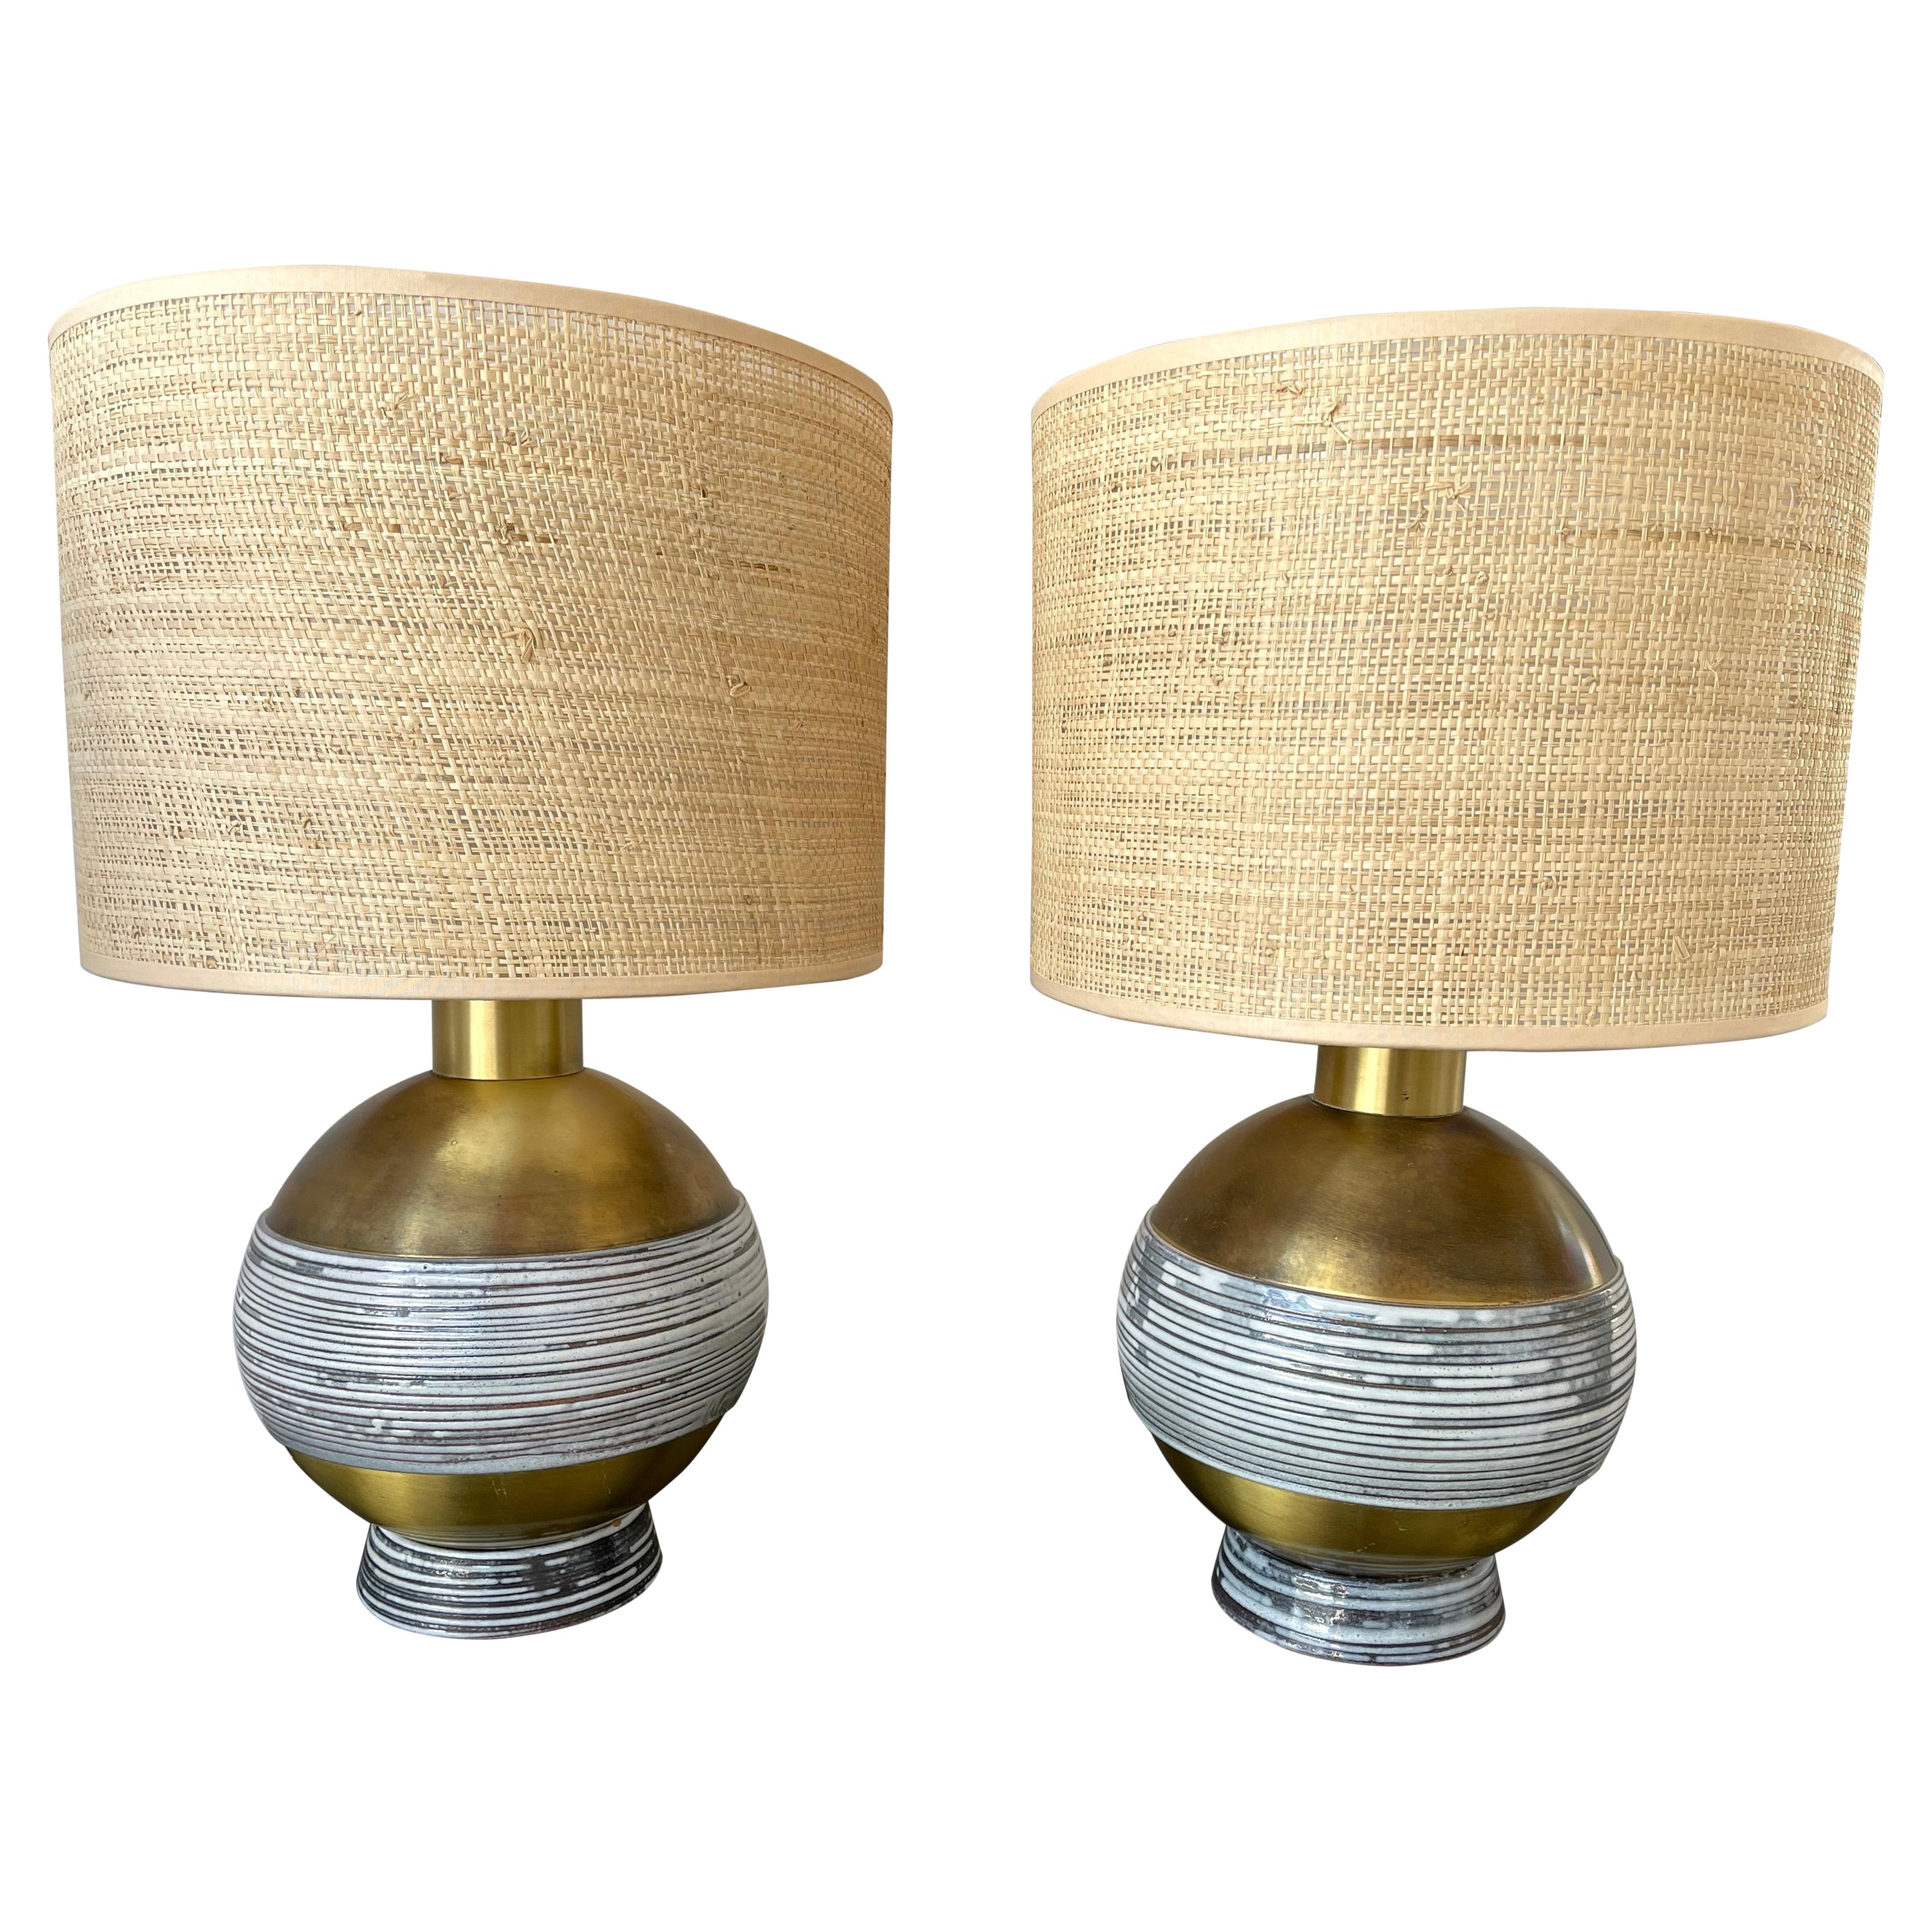 Pair of Brass and Ceramic Lamps. Italy, 1970s